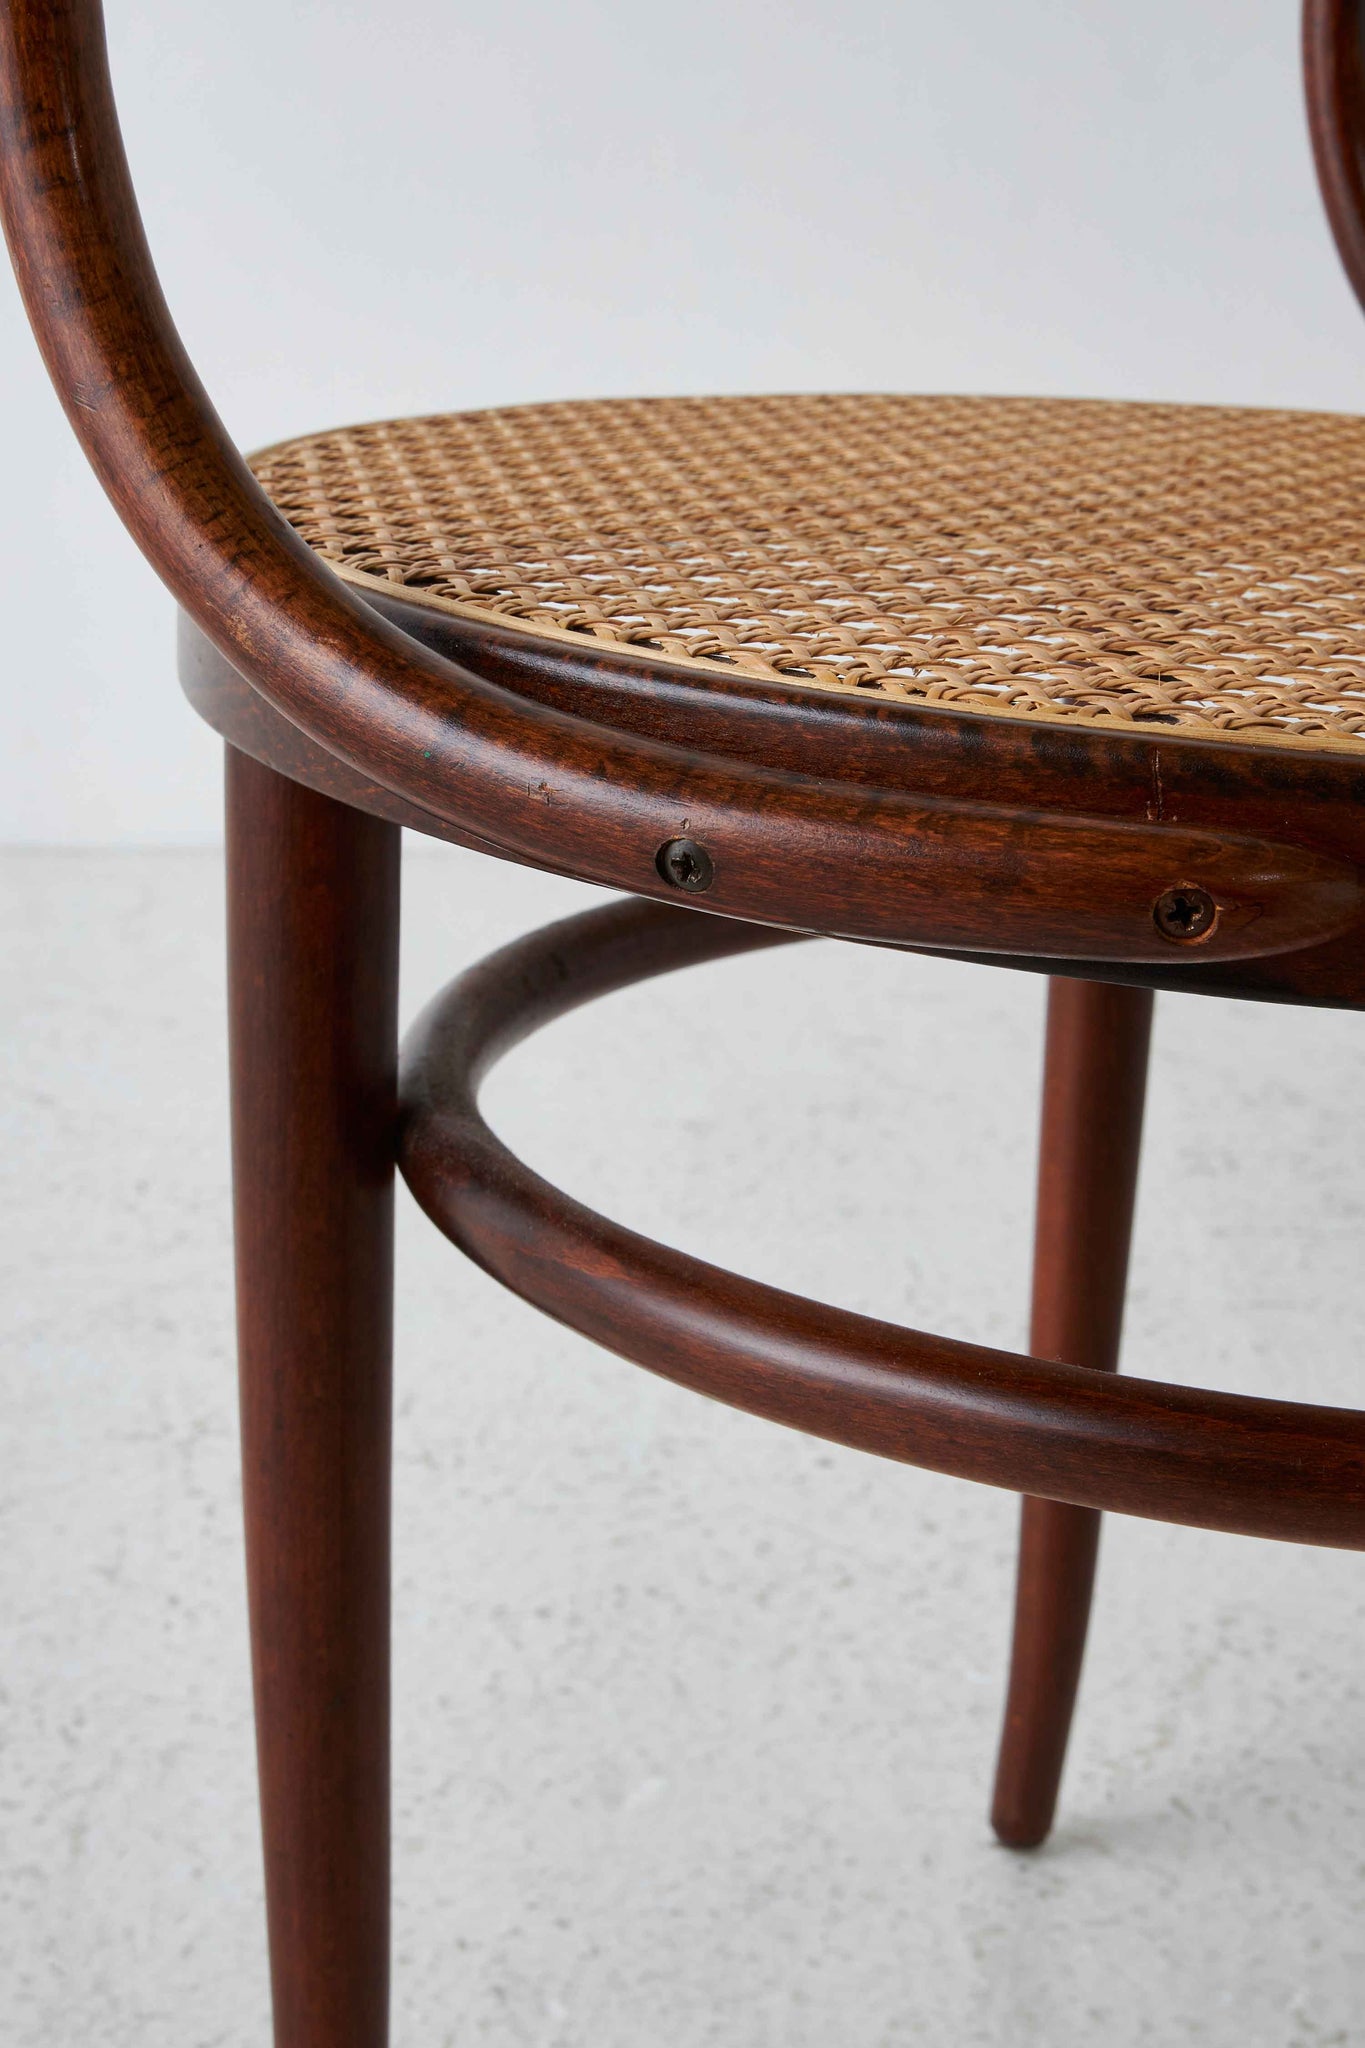 BENTWOOD CHAIR No. 209